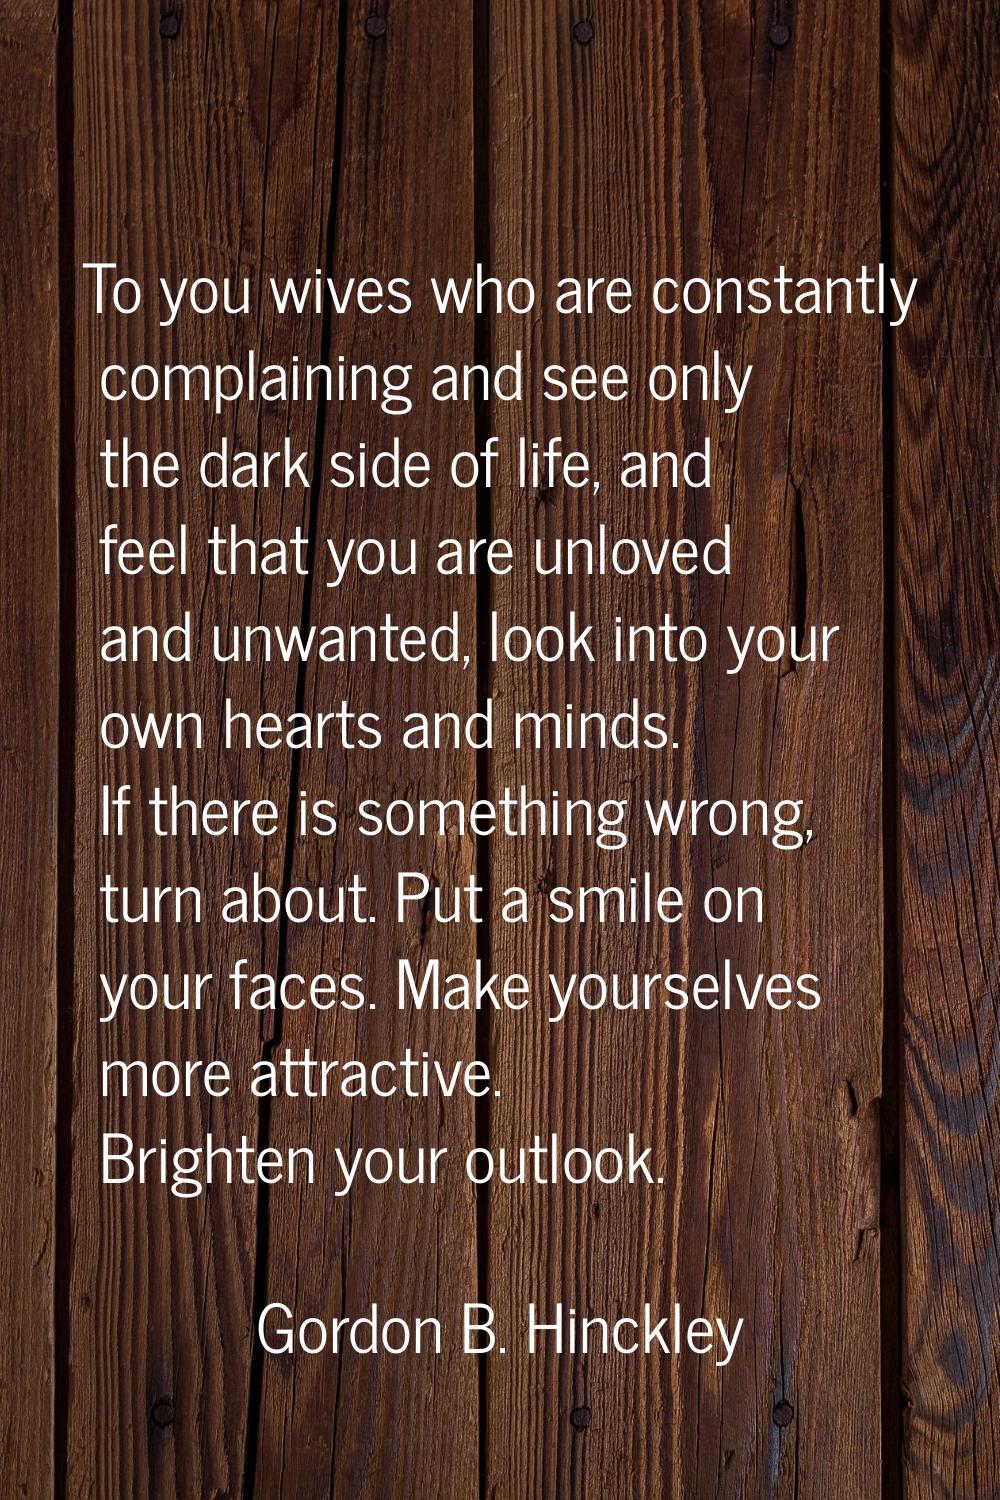 To you wives who are constantly complaining and see only the dark side of life, and feel that you a